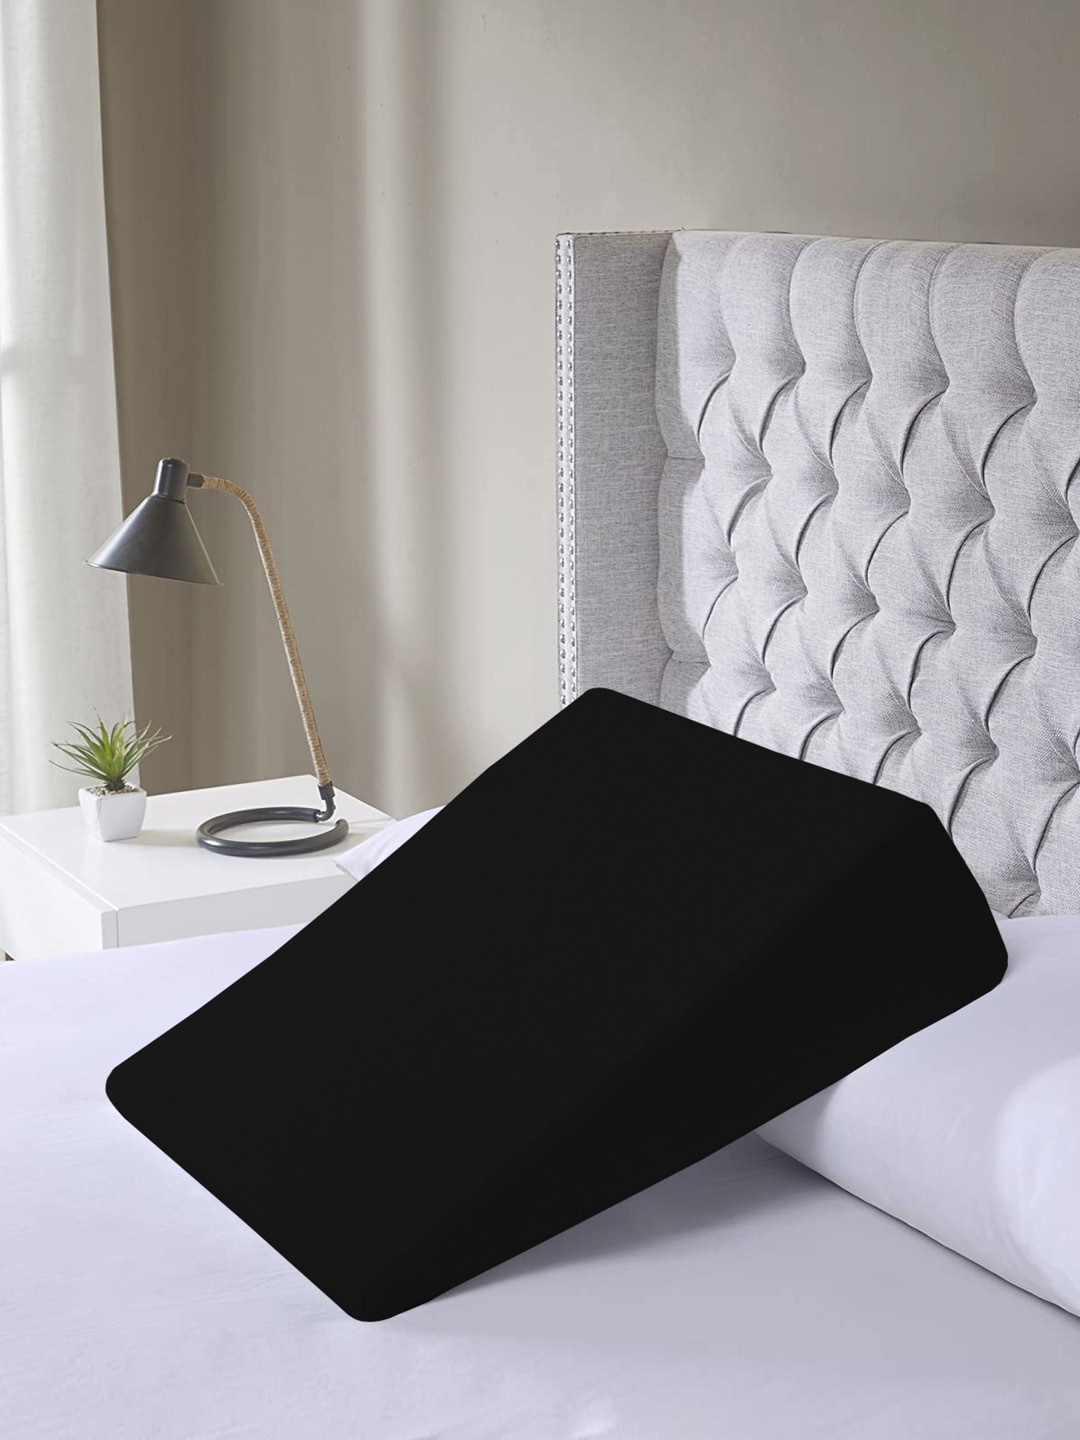 Kuber Industries Unisex Black Solid Cotton Therapedic Pillow Price in India